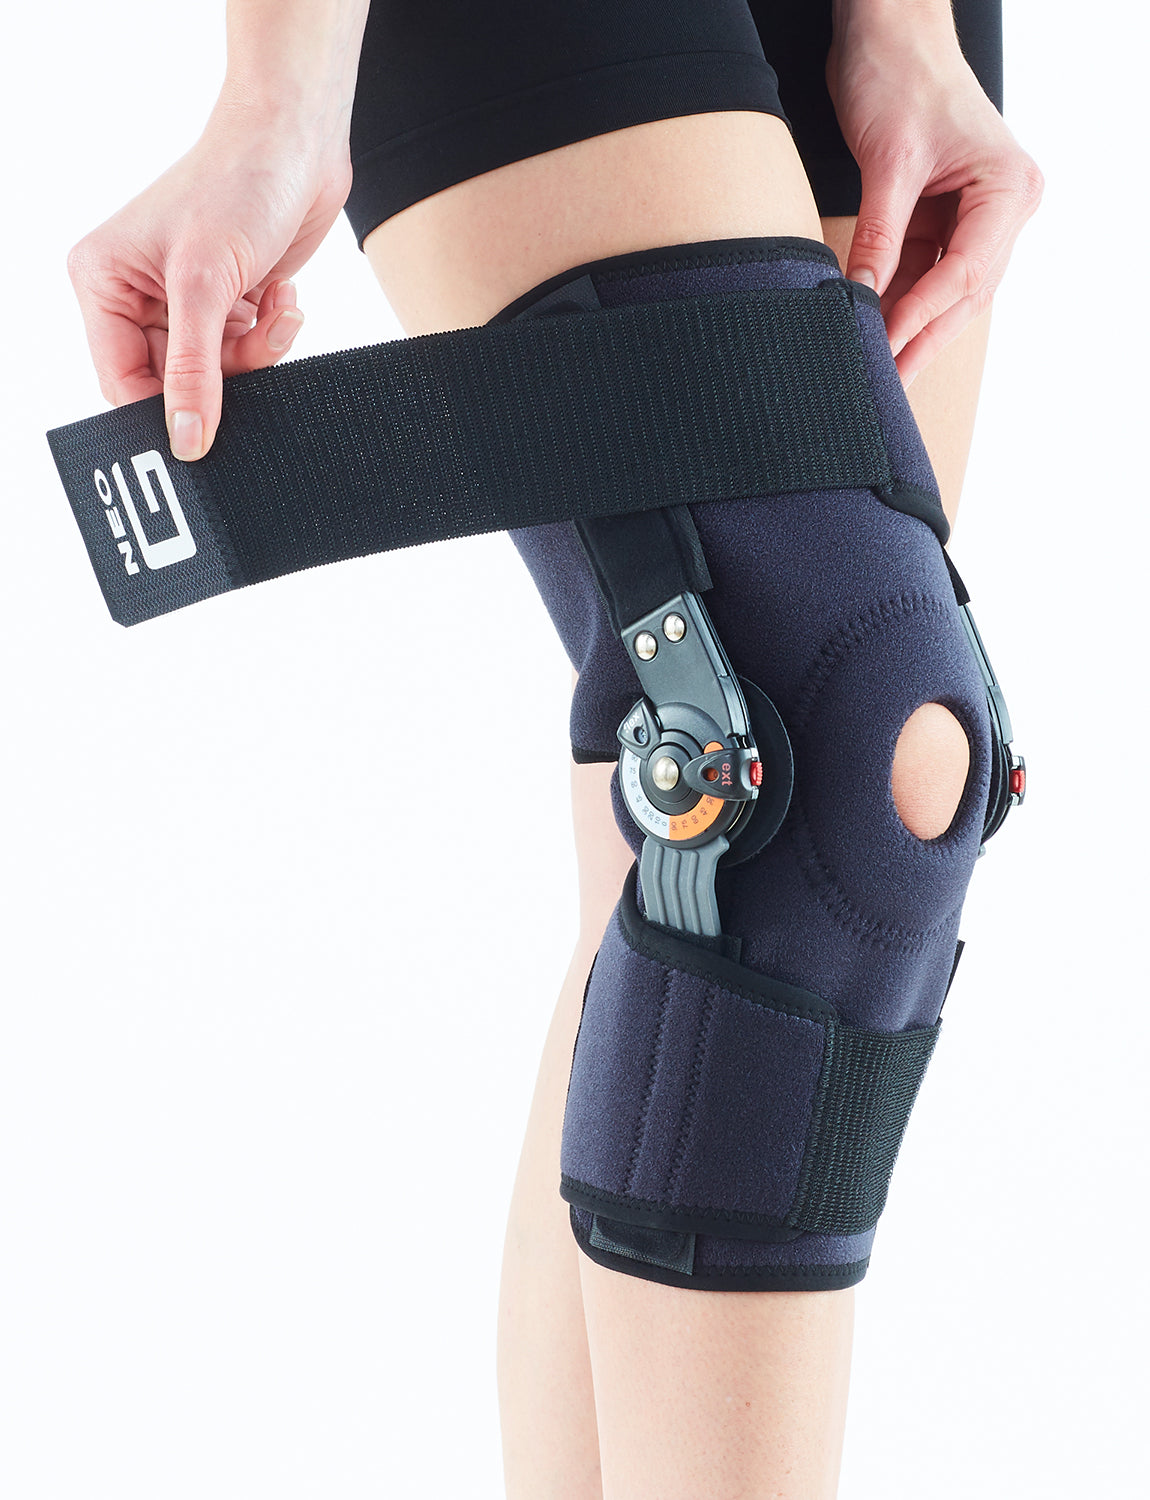 Neo G Hinged Knee Support Brace - Class 1 Medical Device: Free